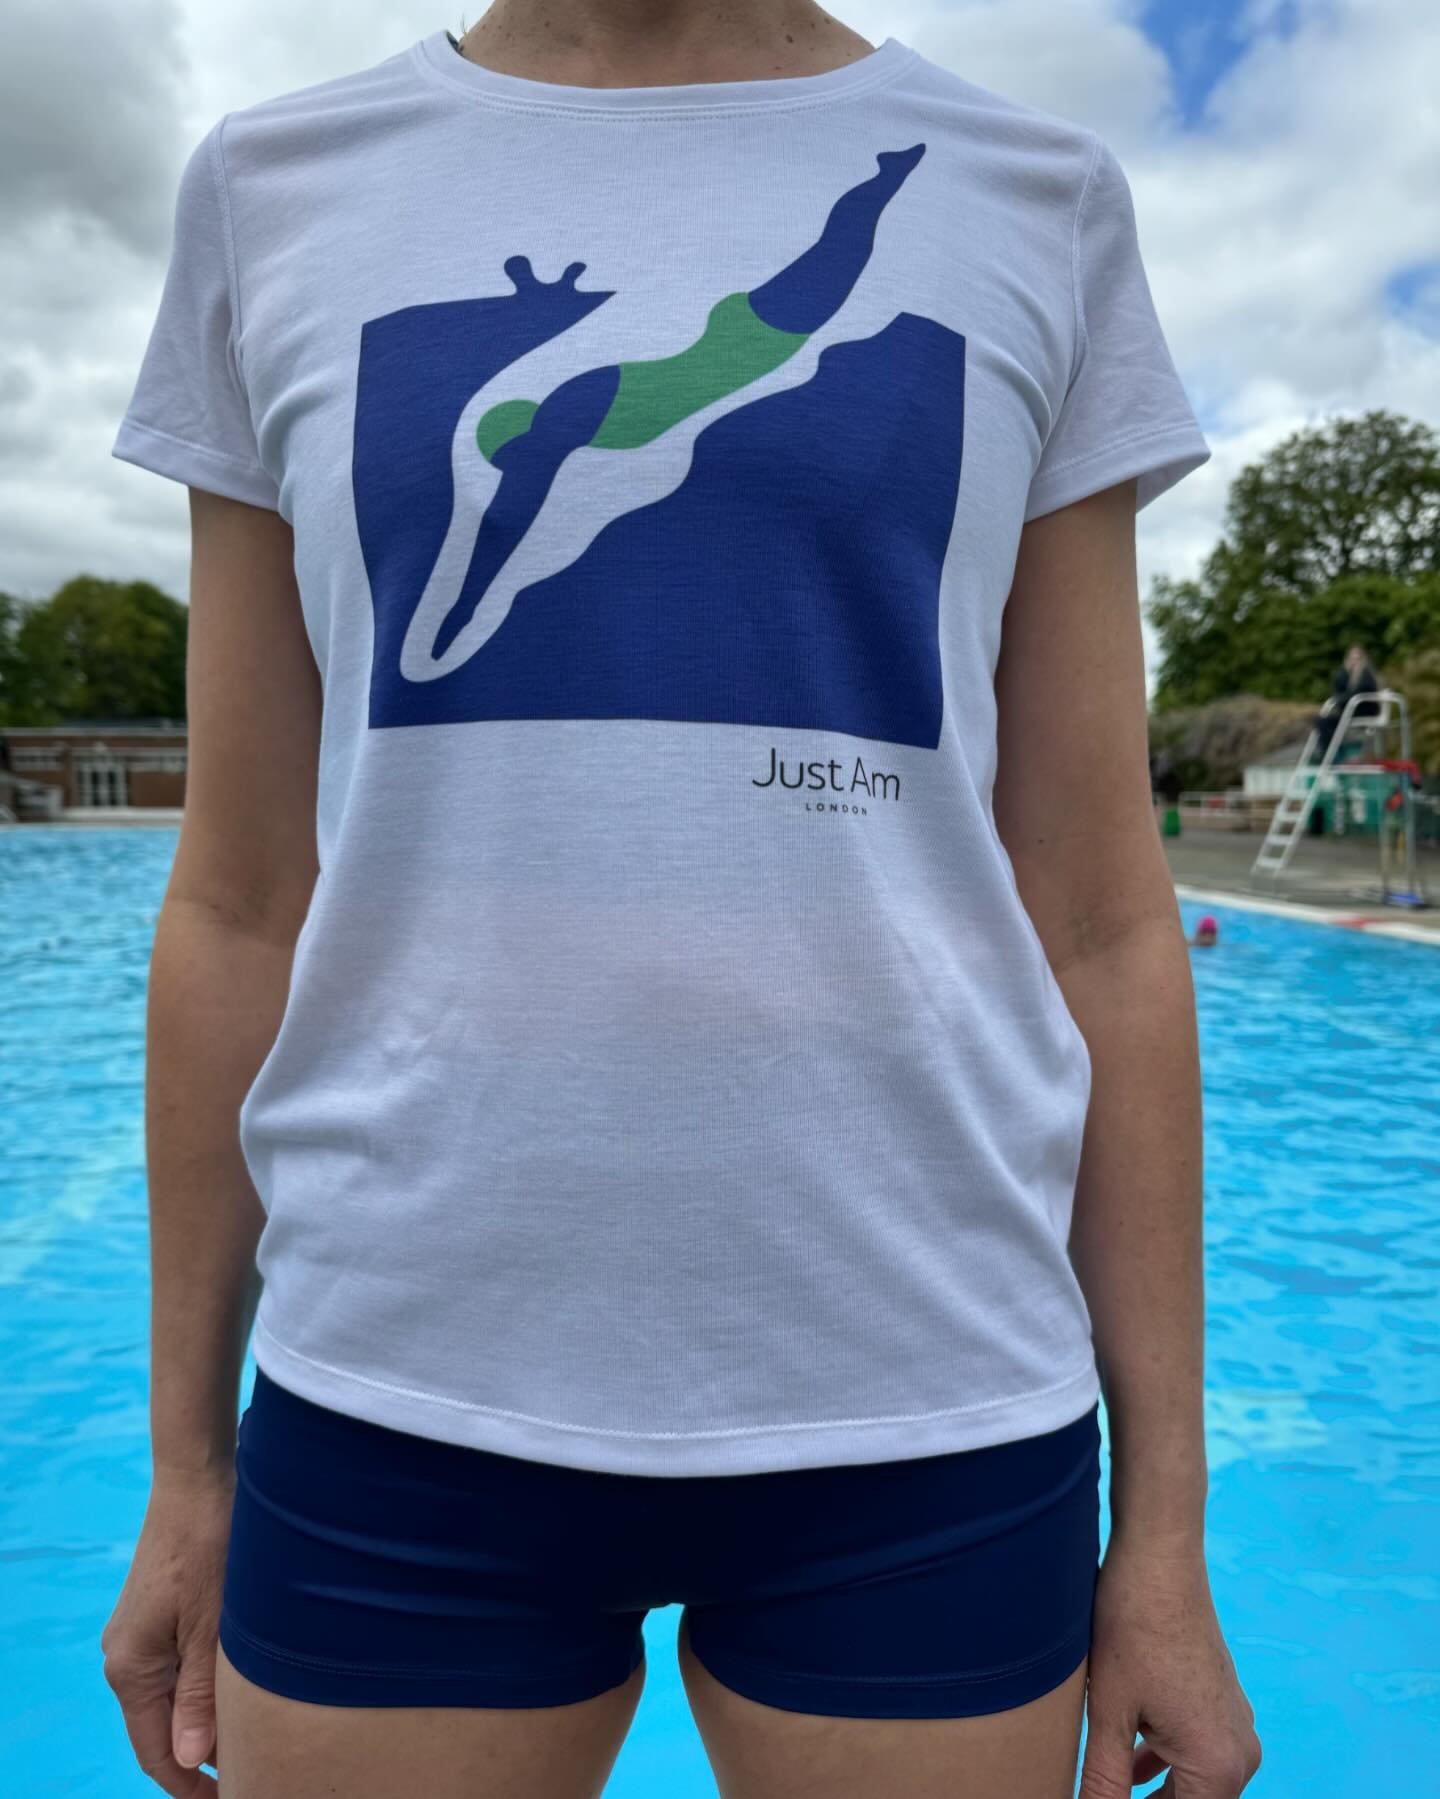 Absolutely thrilled with how our logo looks on this sample t-shirt! Can&rsquo;t wait to have them printed and added to our collection. #lidotshirts #logotshirts #lido #lidolife #lidoshorts